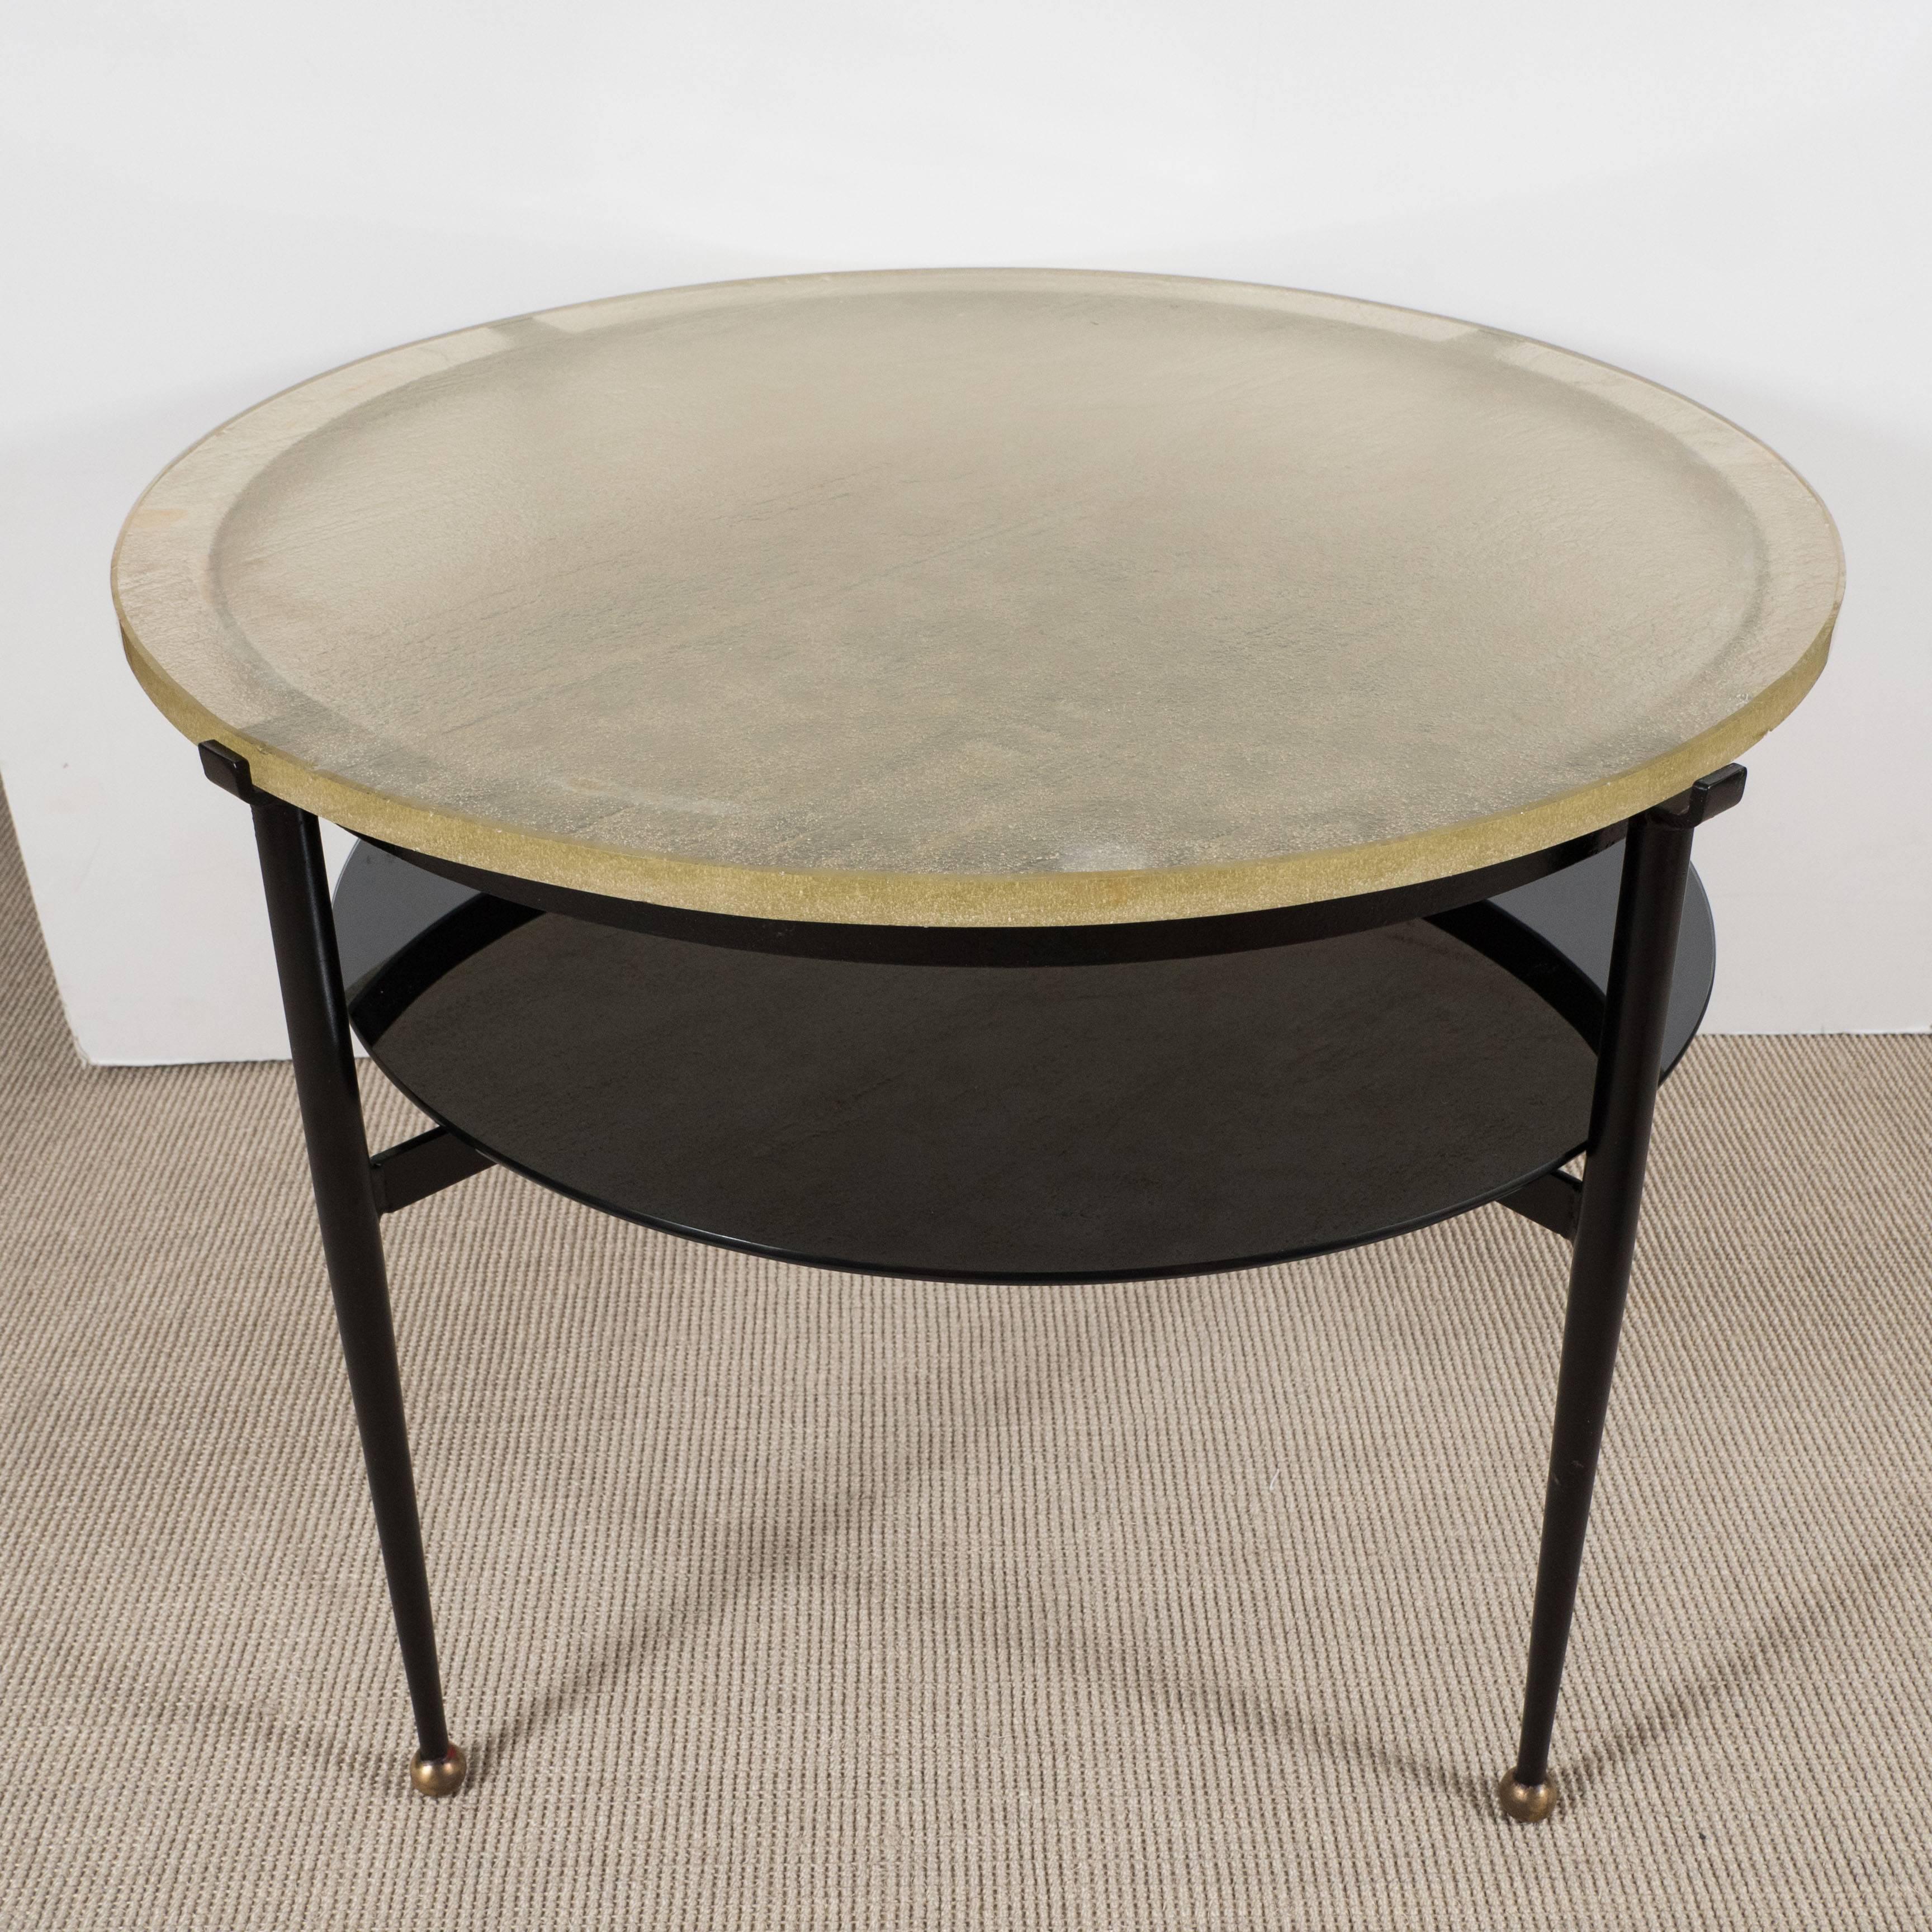 Round low table, Saint Gobain top, France, circa 1950s.